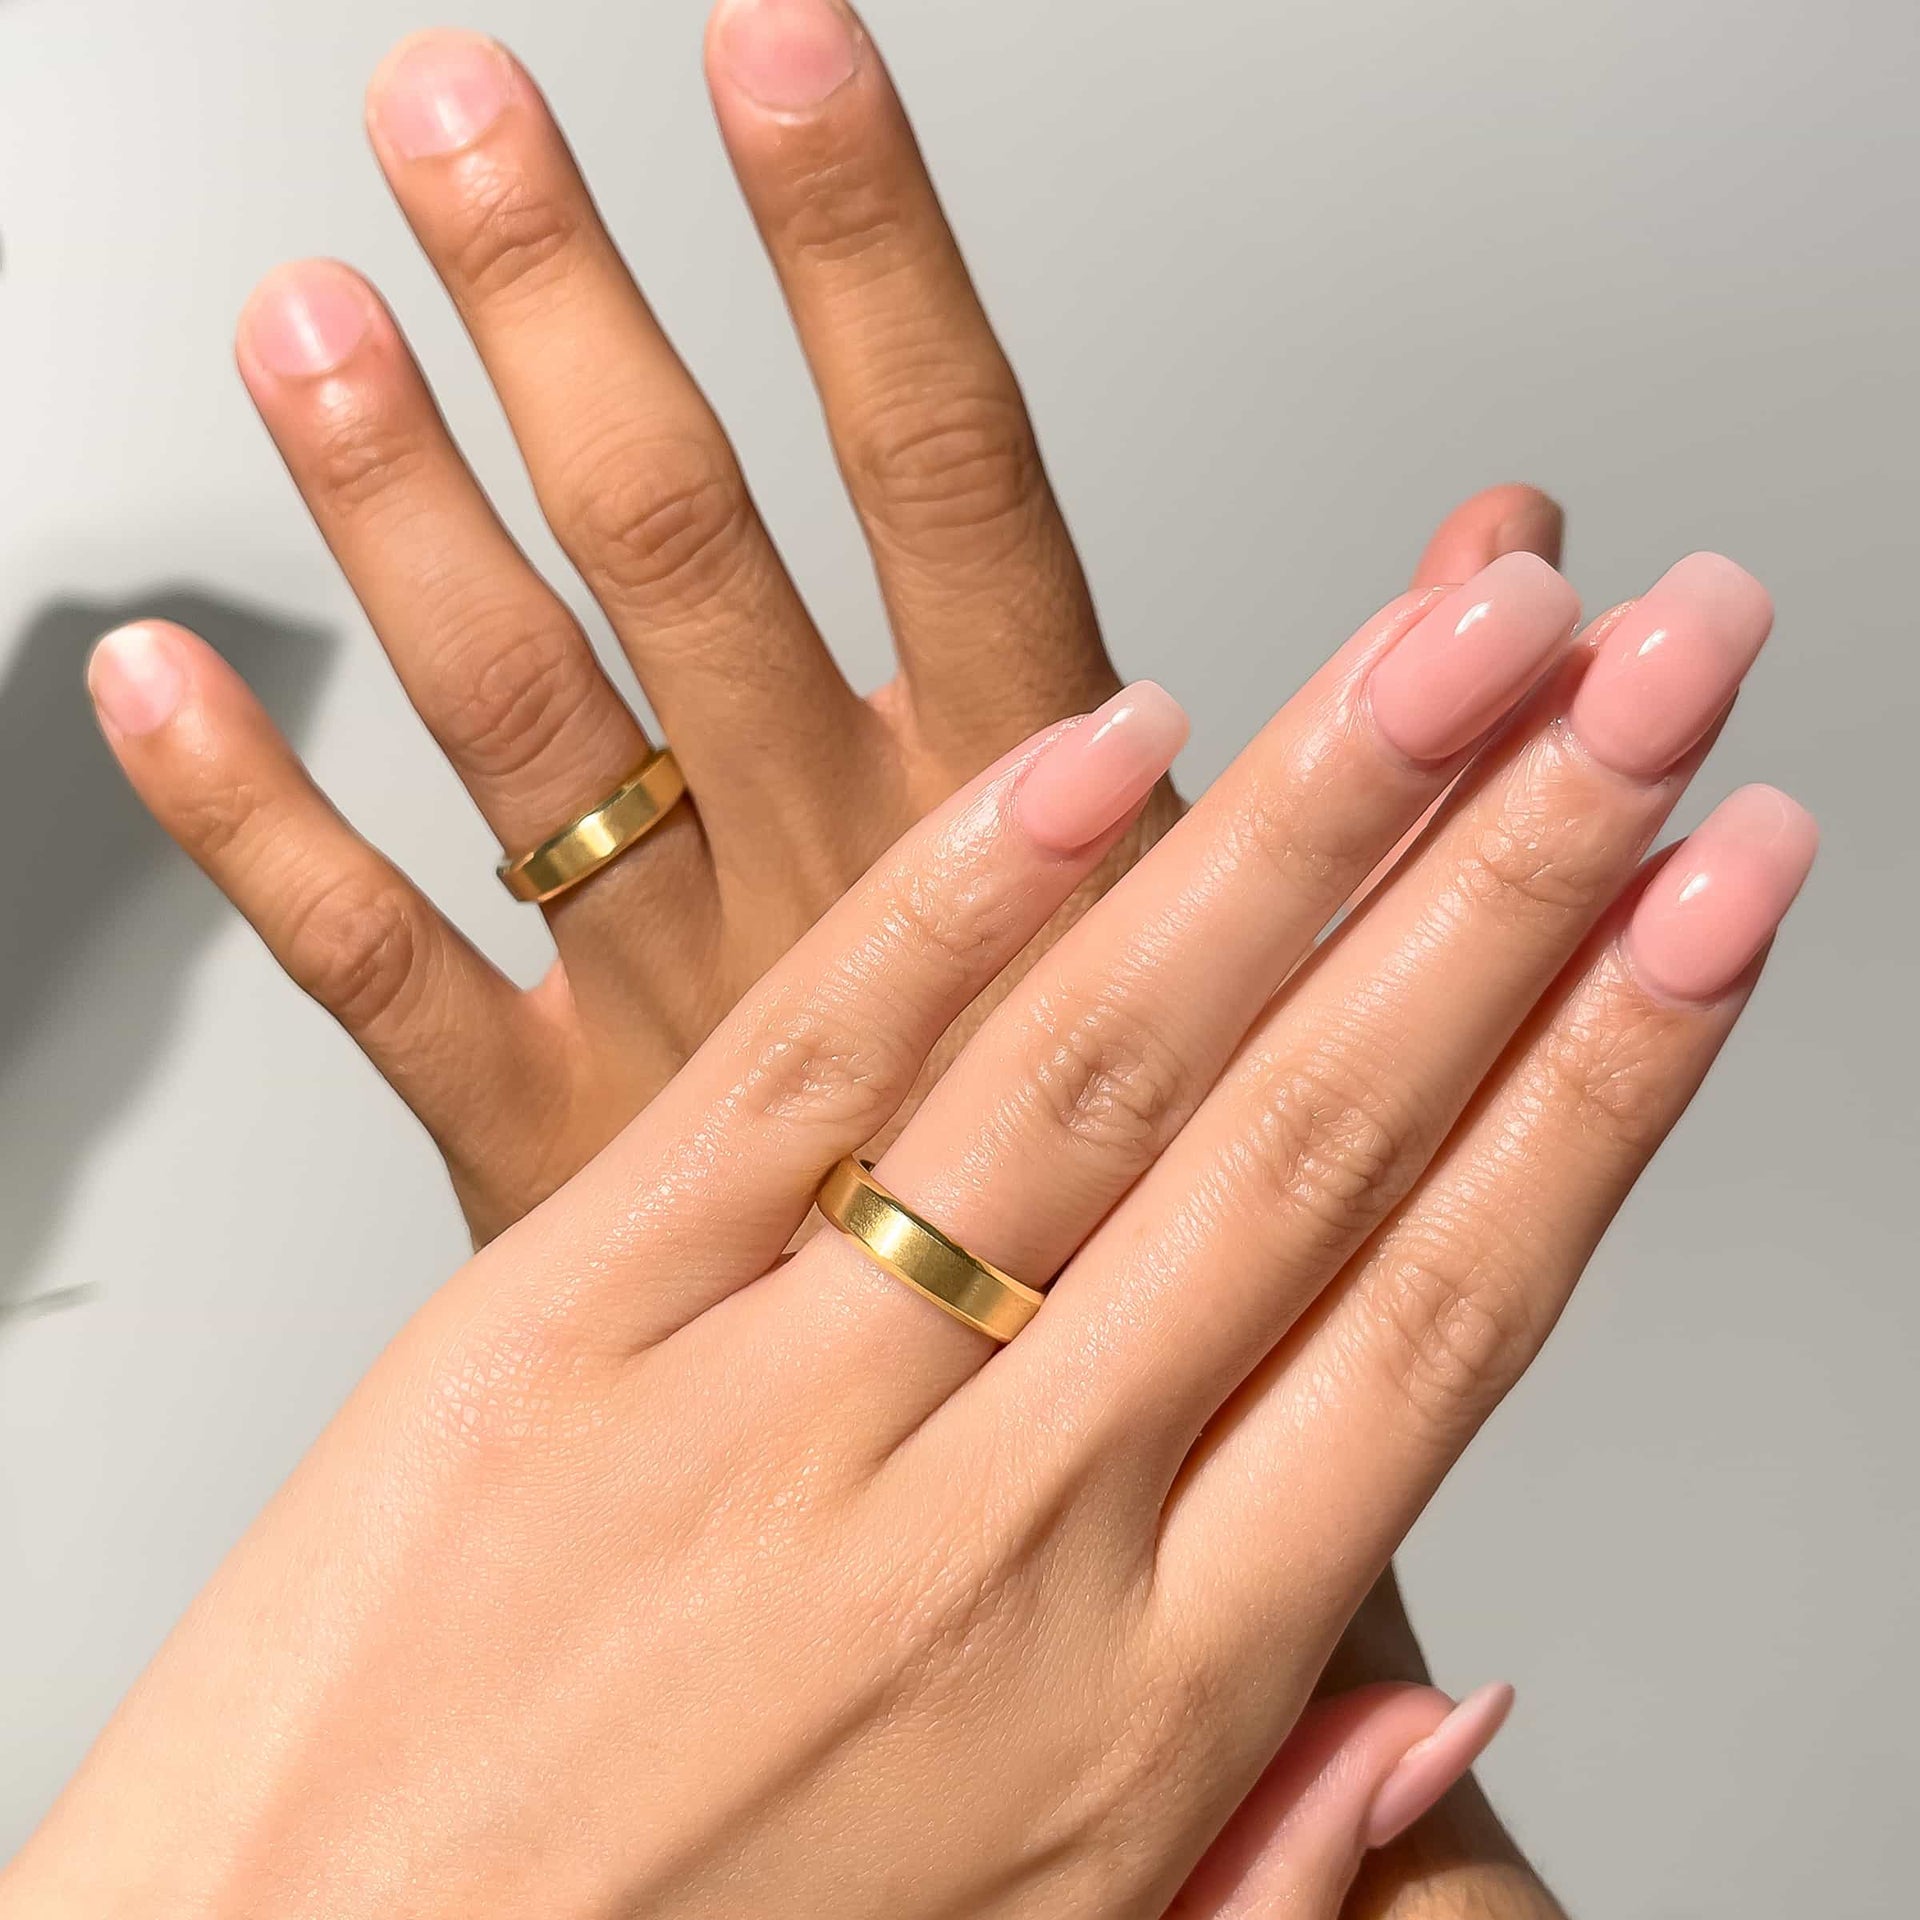 Couple point of view wearing unisex wedding band in gold against gray background